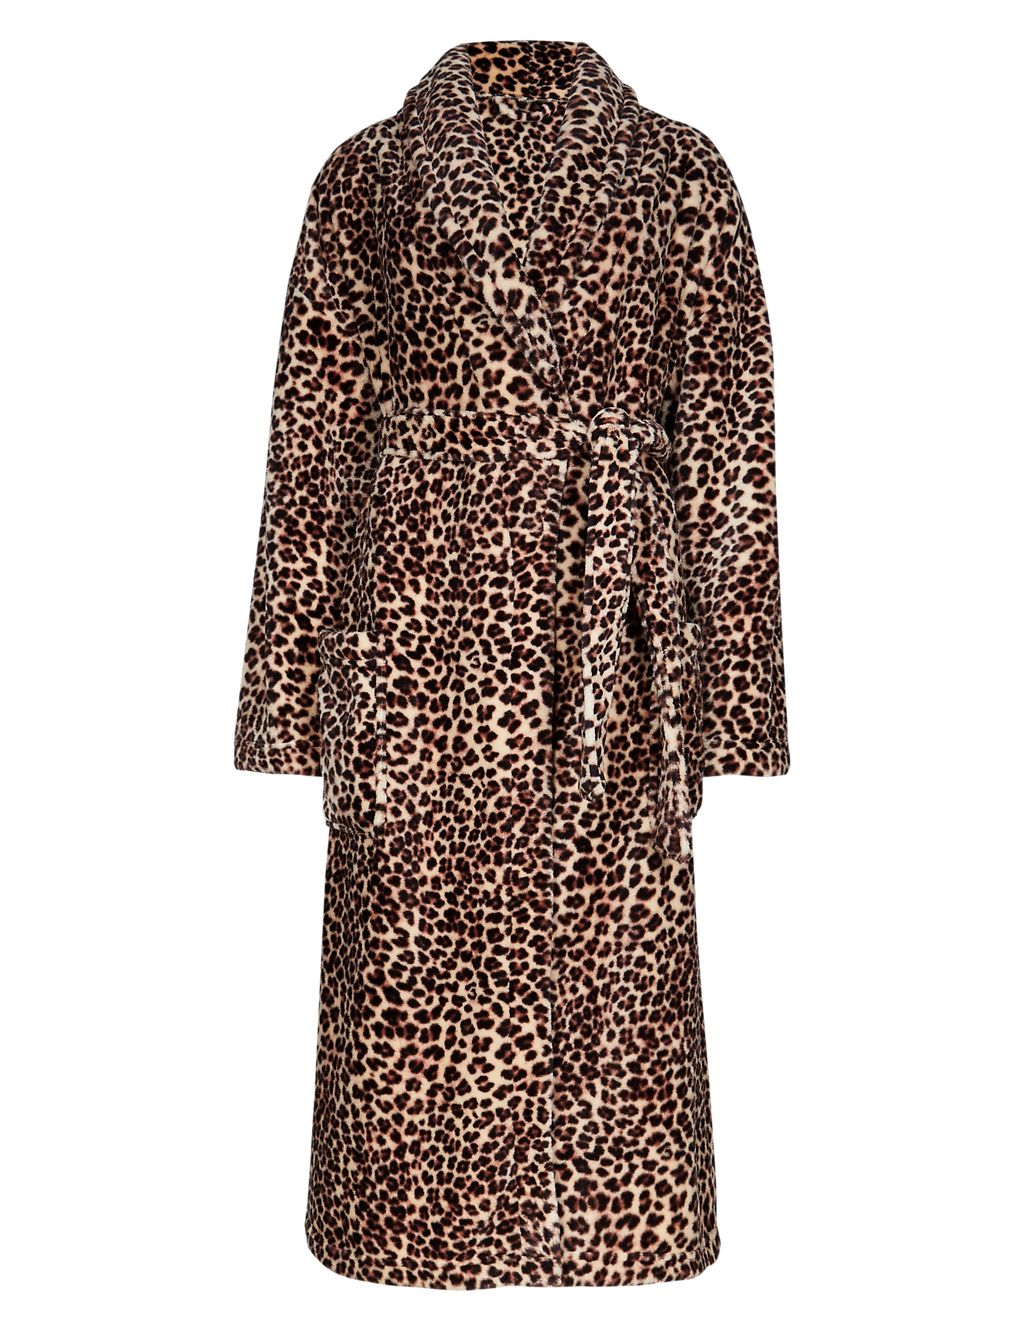 Leopard Print Dressing Gown with Belt 4 of 5